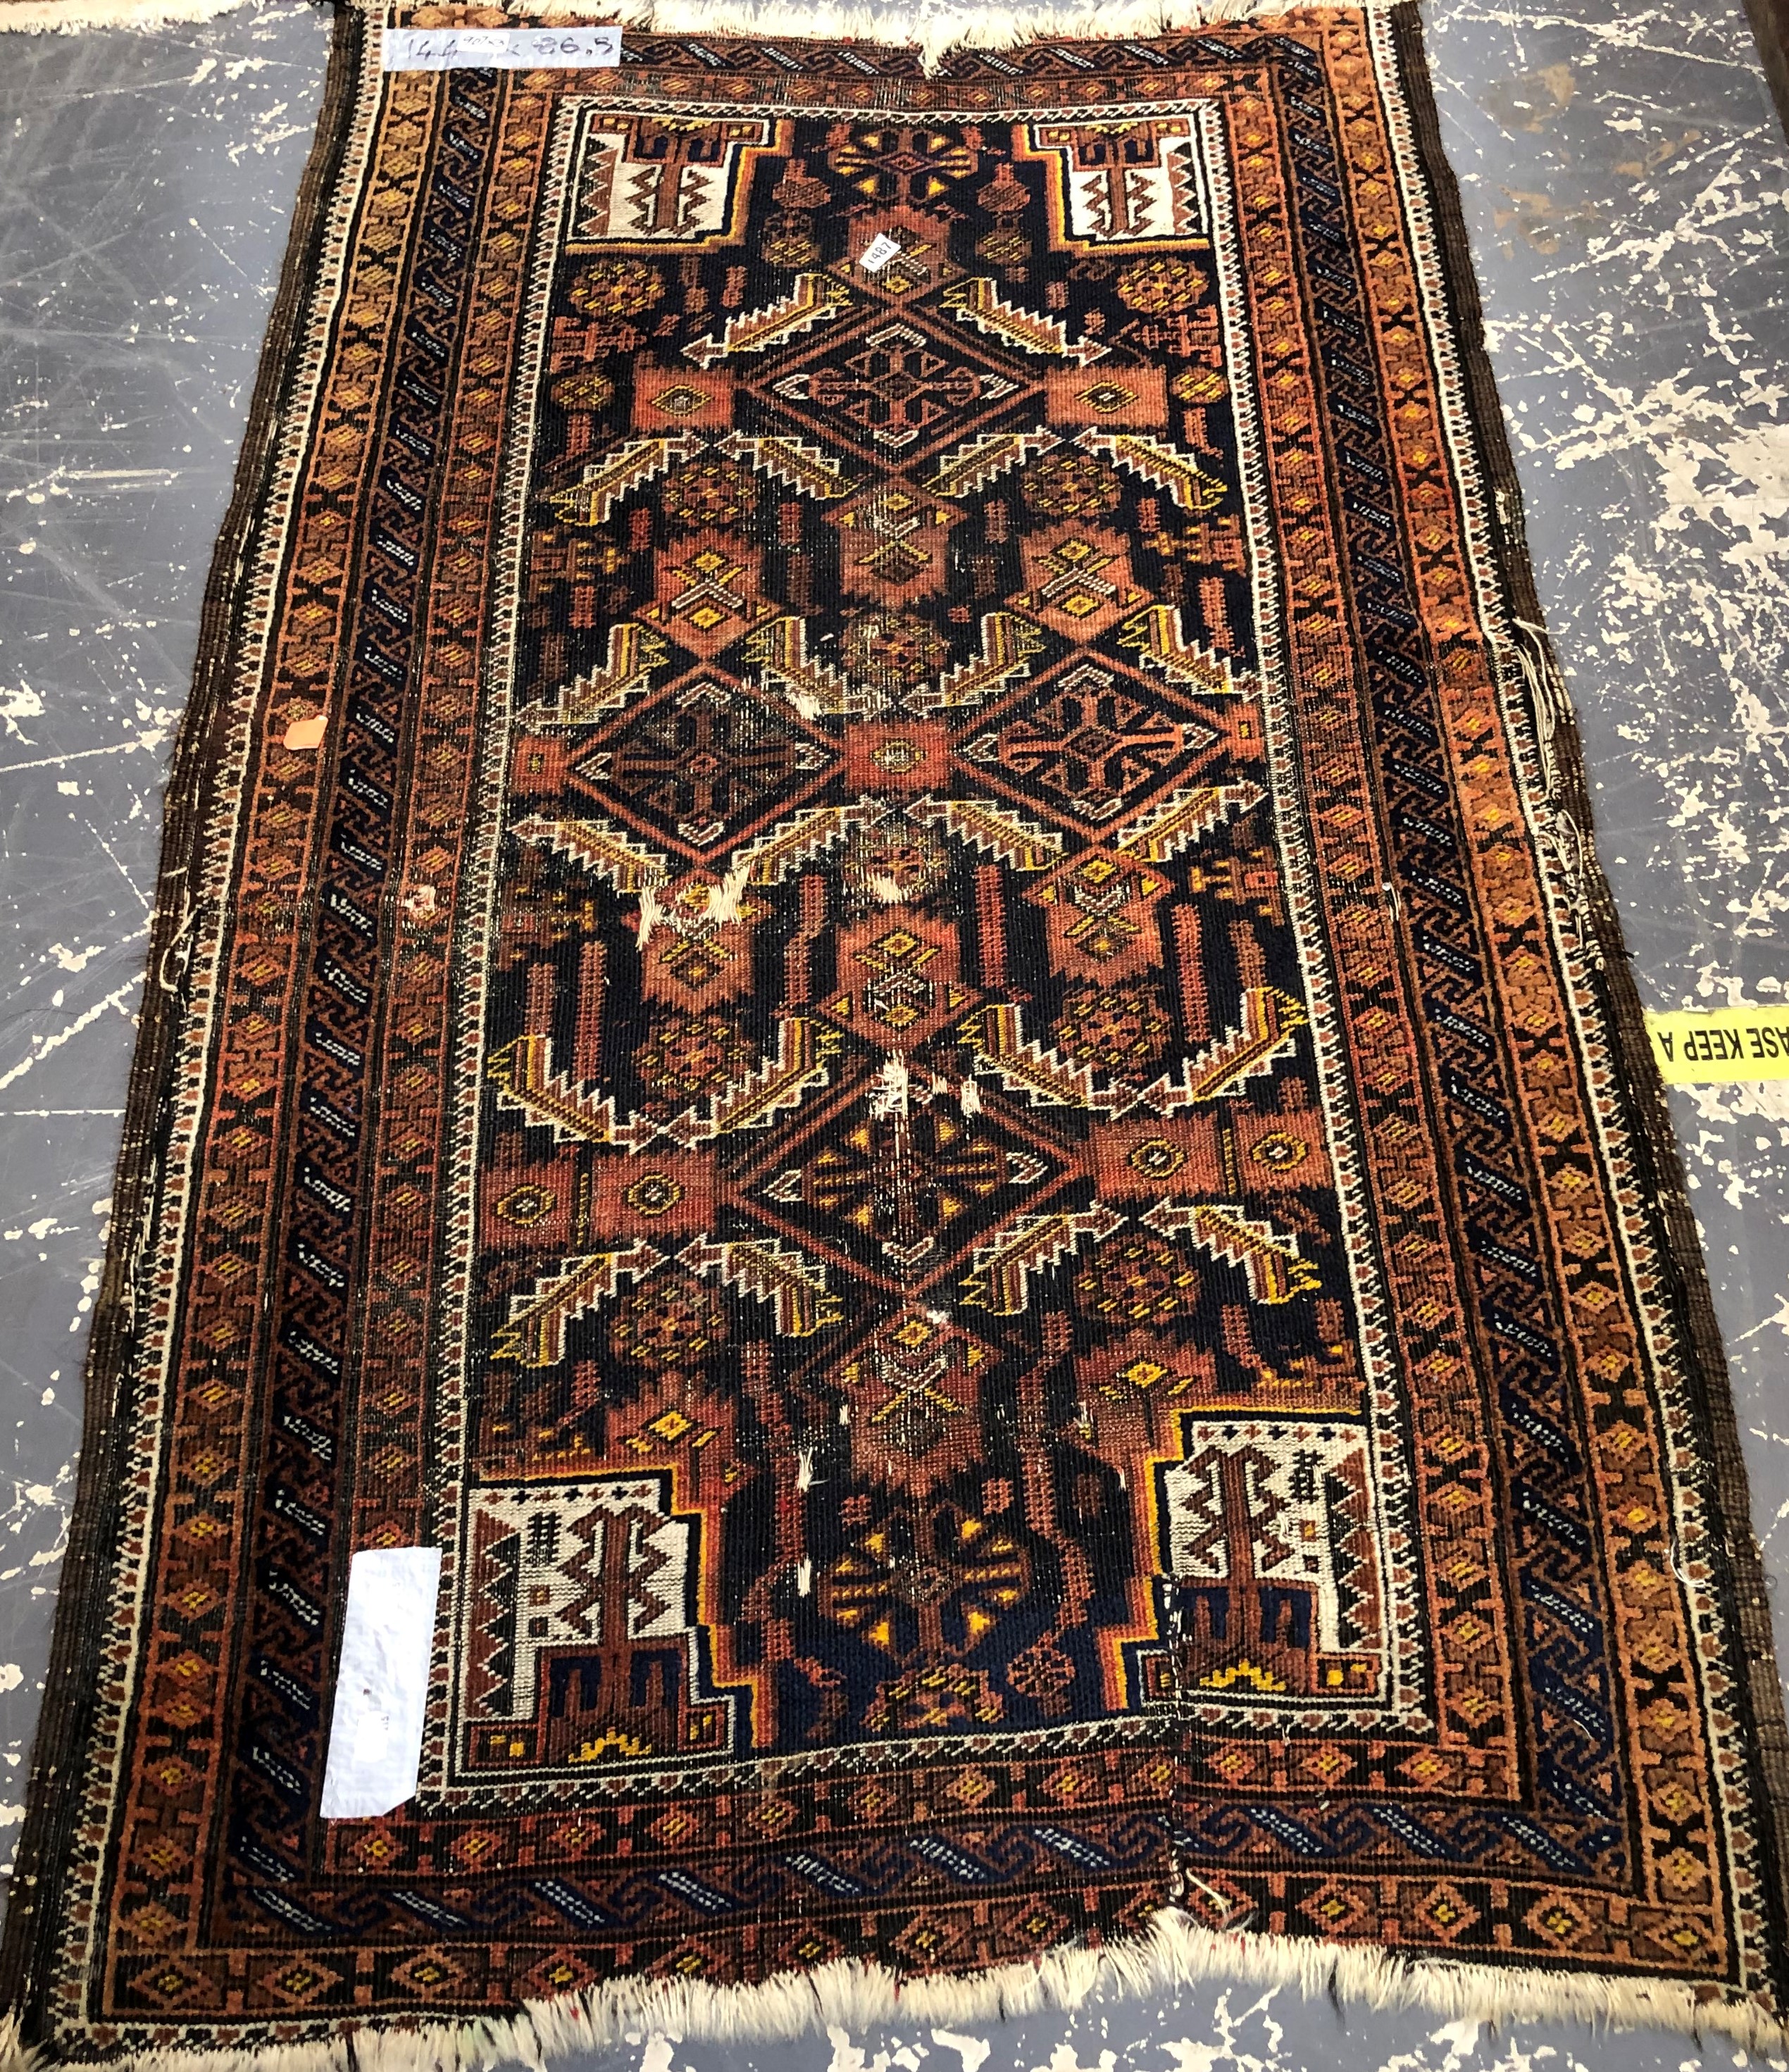 TWO BELOUCH TRIBAL RUGS. TOGETHER WITH AN ANTIQUE CHINESE RUG. 144 x 86, 124 x 83 AND 146 x 81cms ( - Image 3 of 4